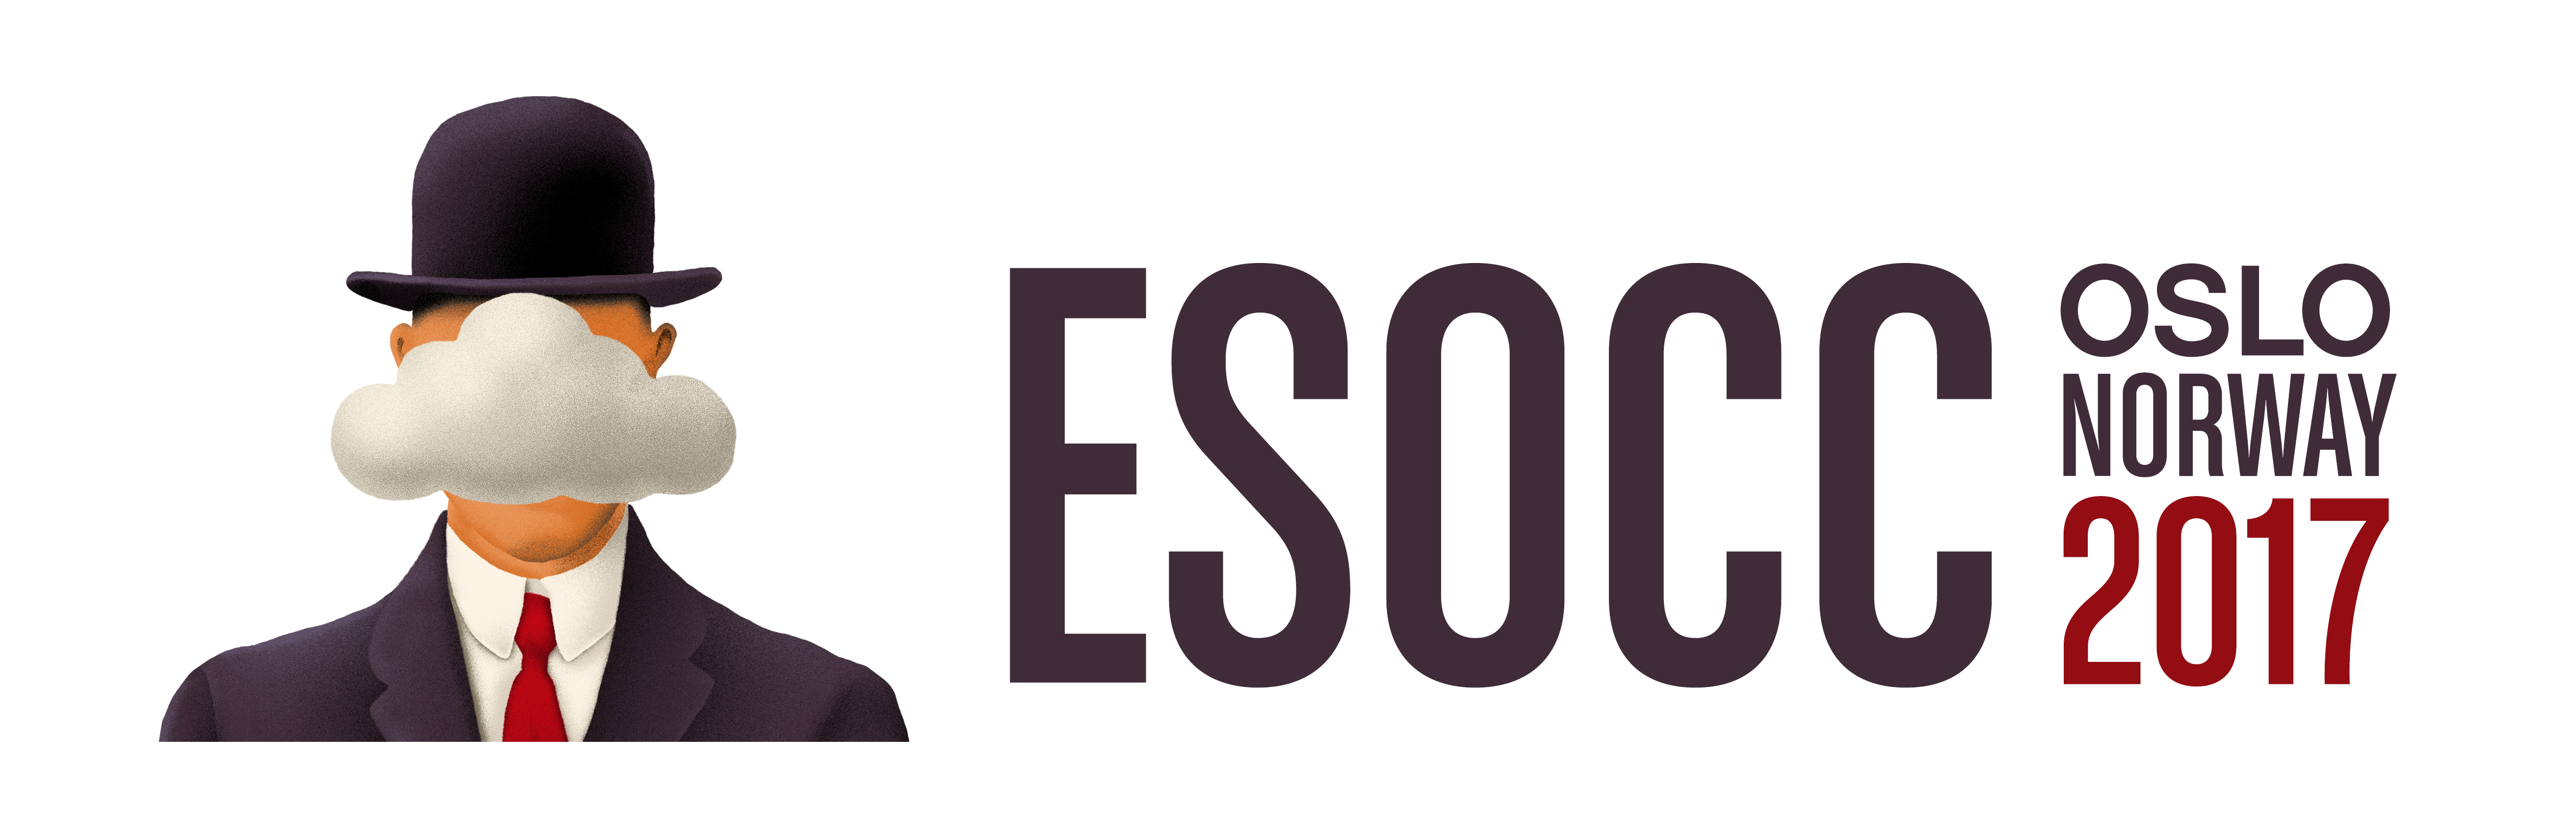 About ESOCC2017